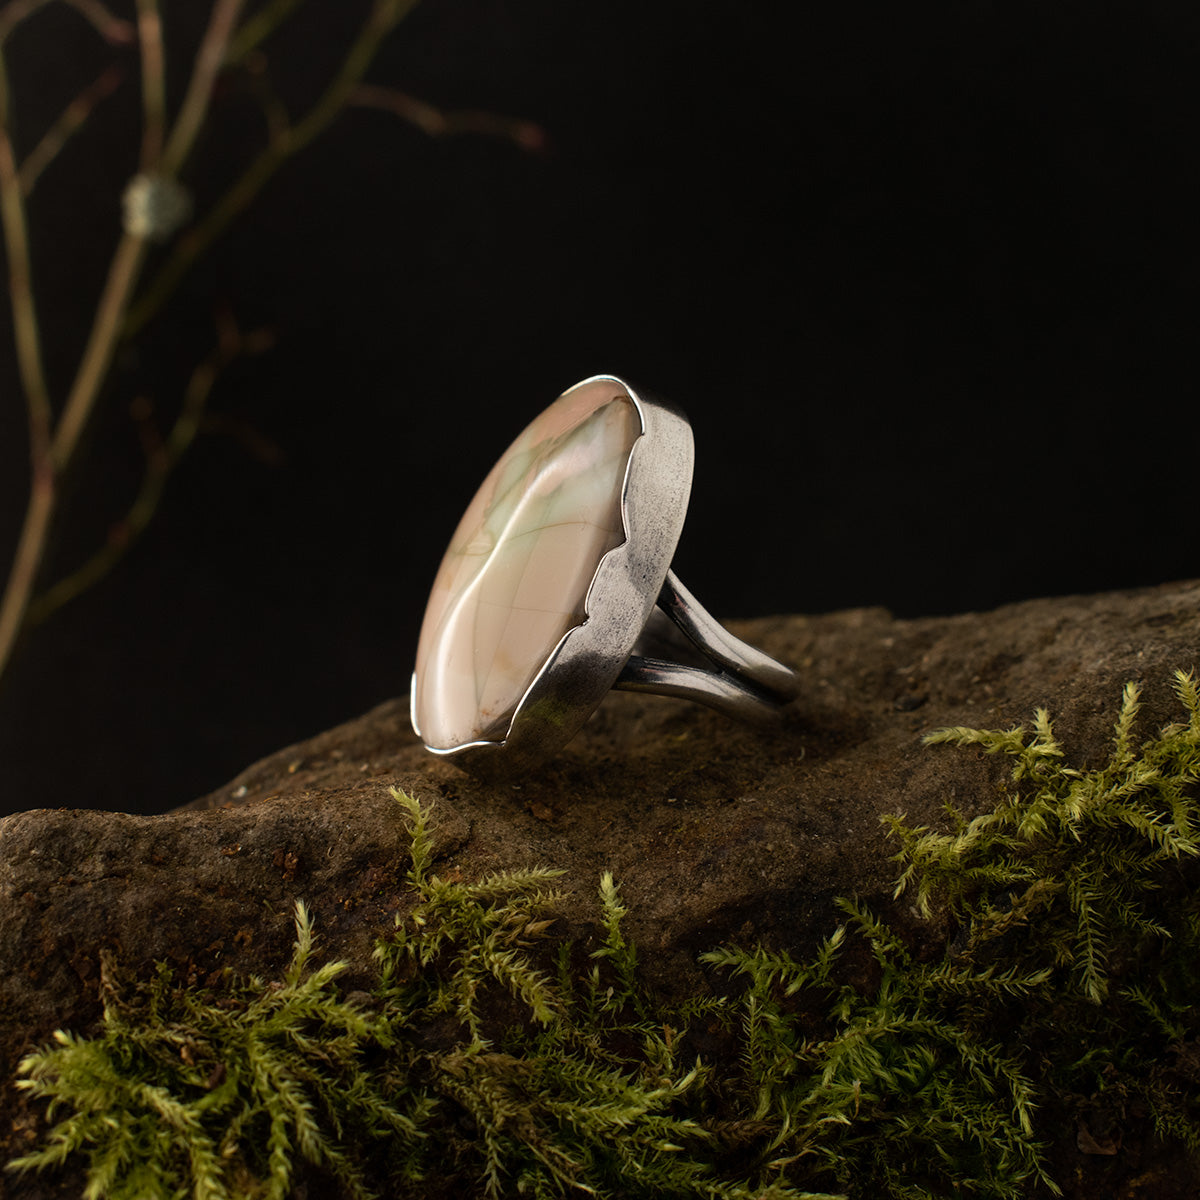 The left side of the Imperial Jasper Fracture Ring, showing its substantial sterling silver bezel, custom shaped to intersect with the stone’s natural fissures.